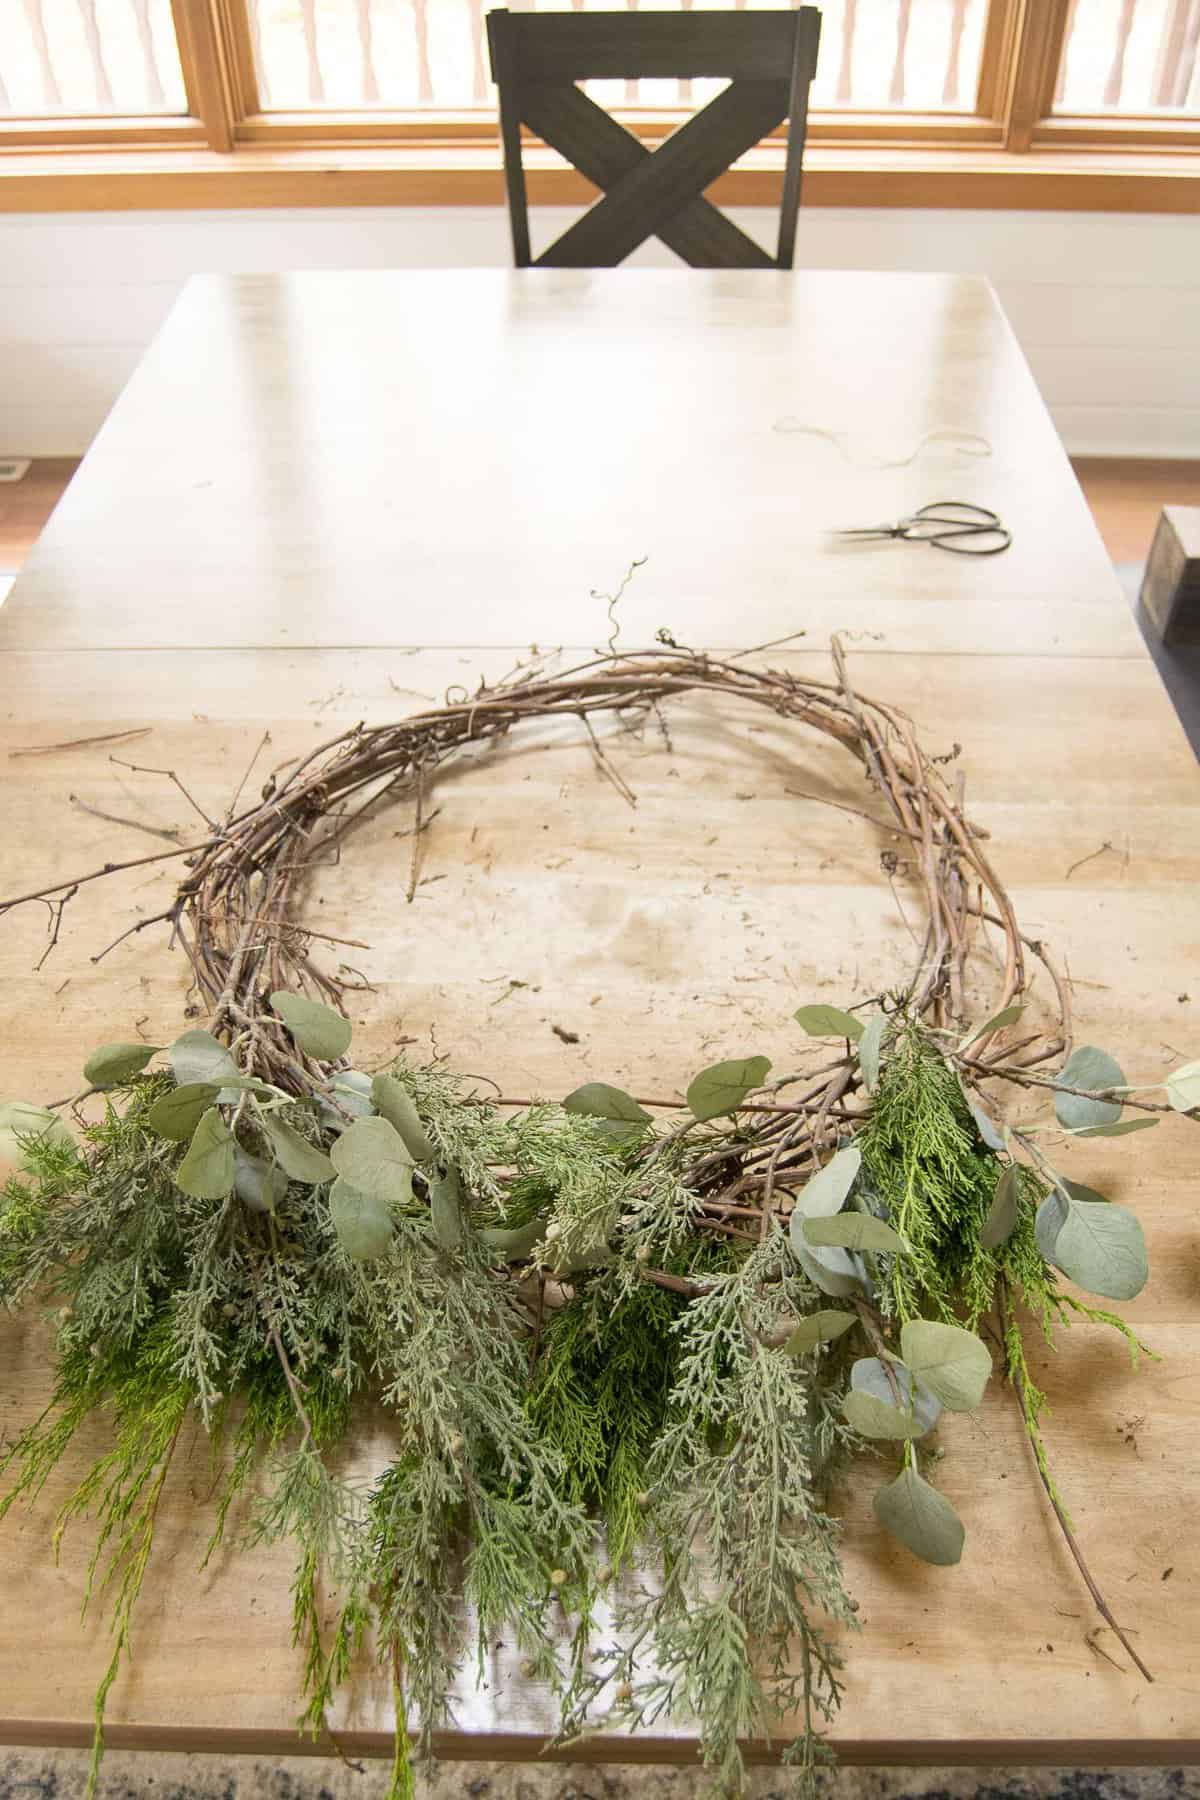 Are you looking for an affordable Christmas wreath? Make your own! Click for a tutorial on how to make a DIY Christmas grapevine wreath. #christmaswreath